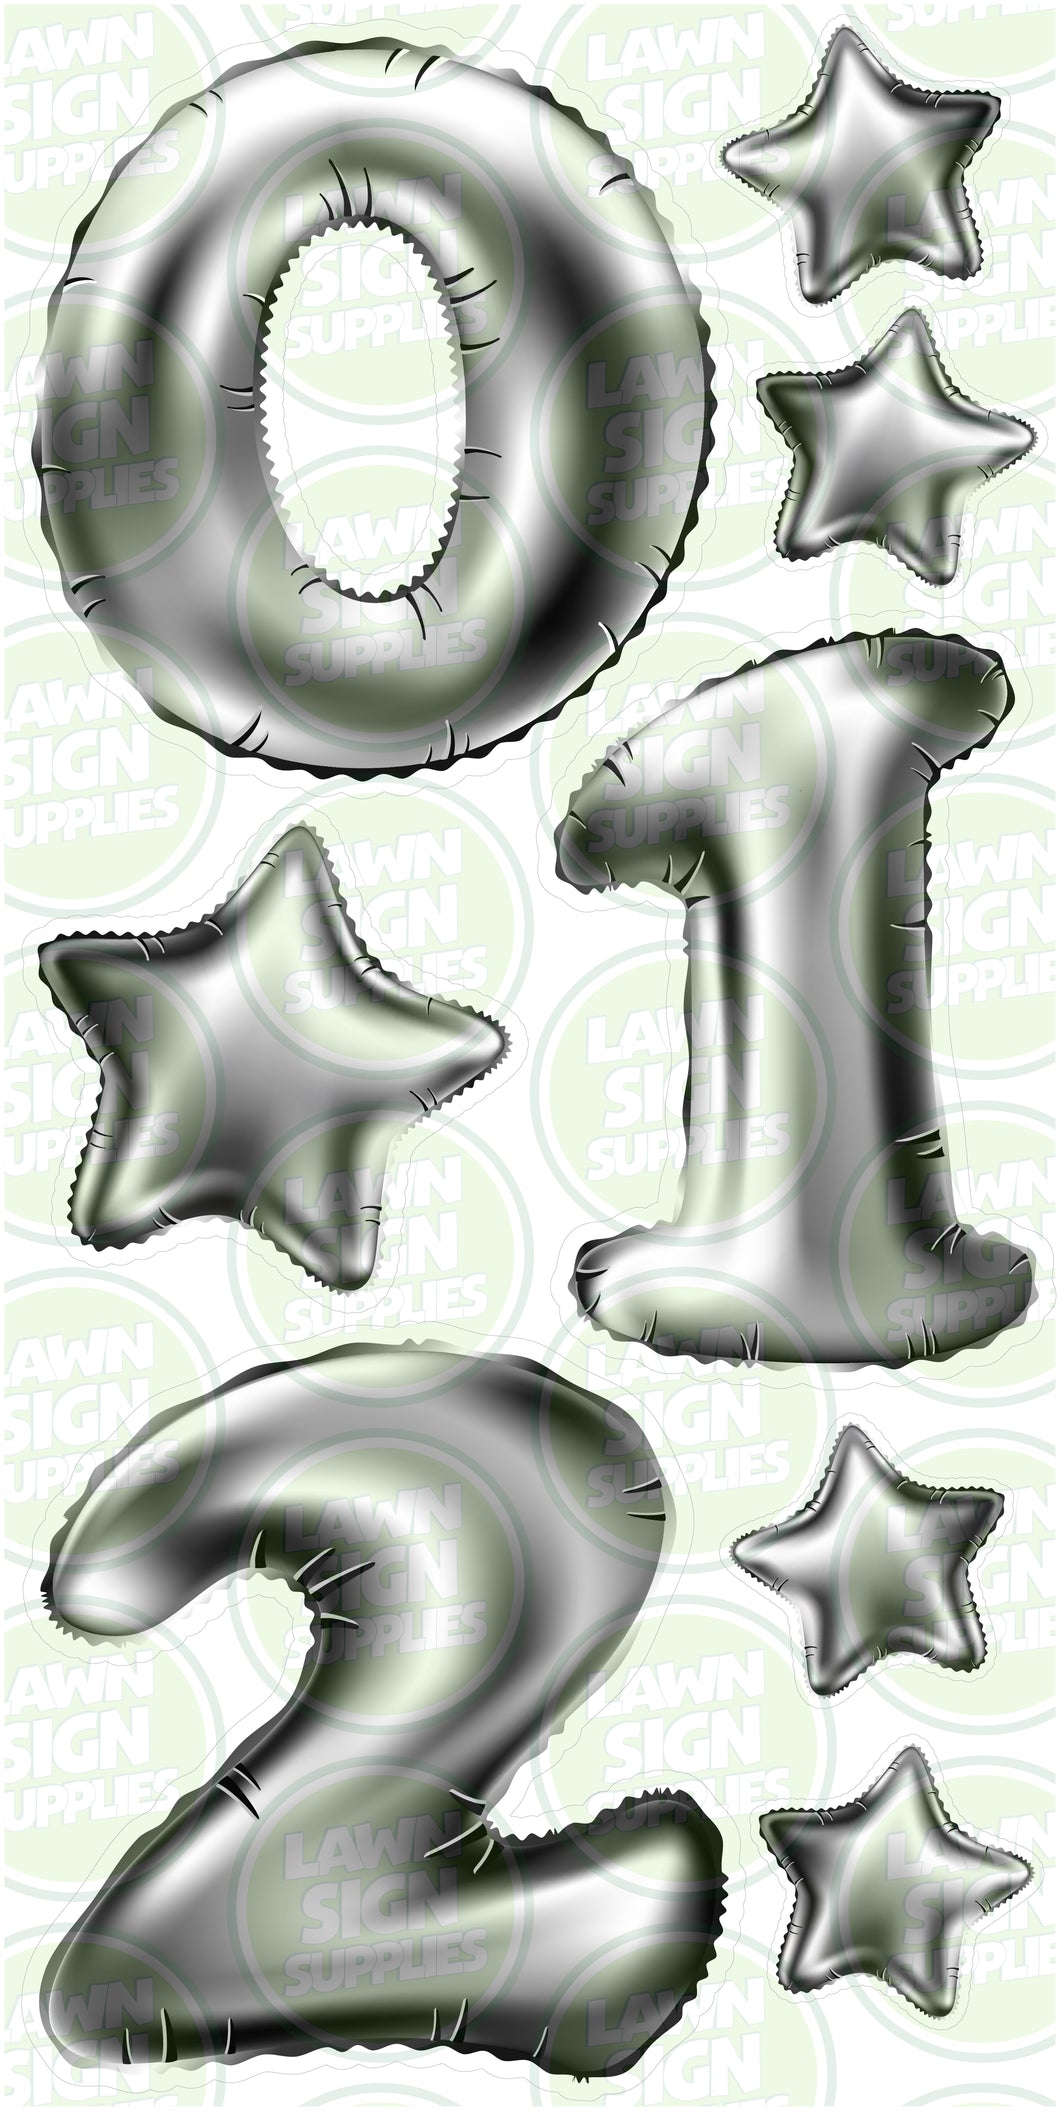 NUMBERS - SILVER FOIL BALLOONS (JUMBO)